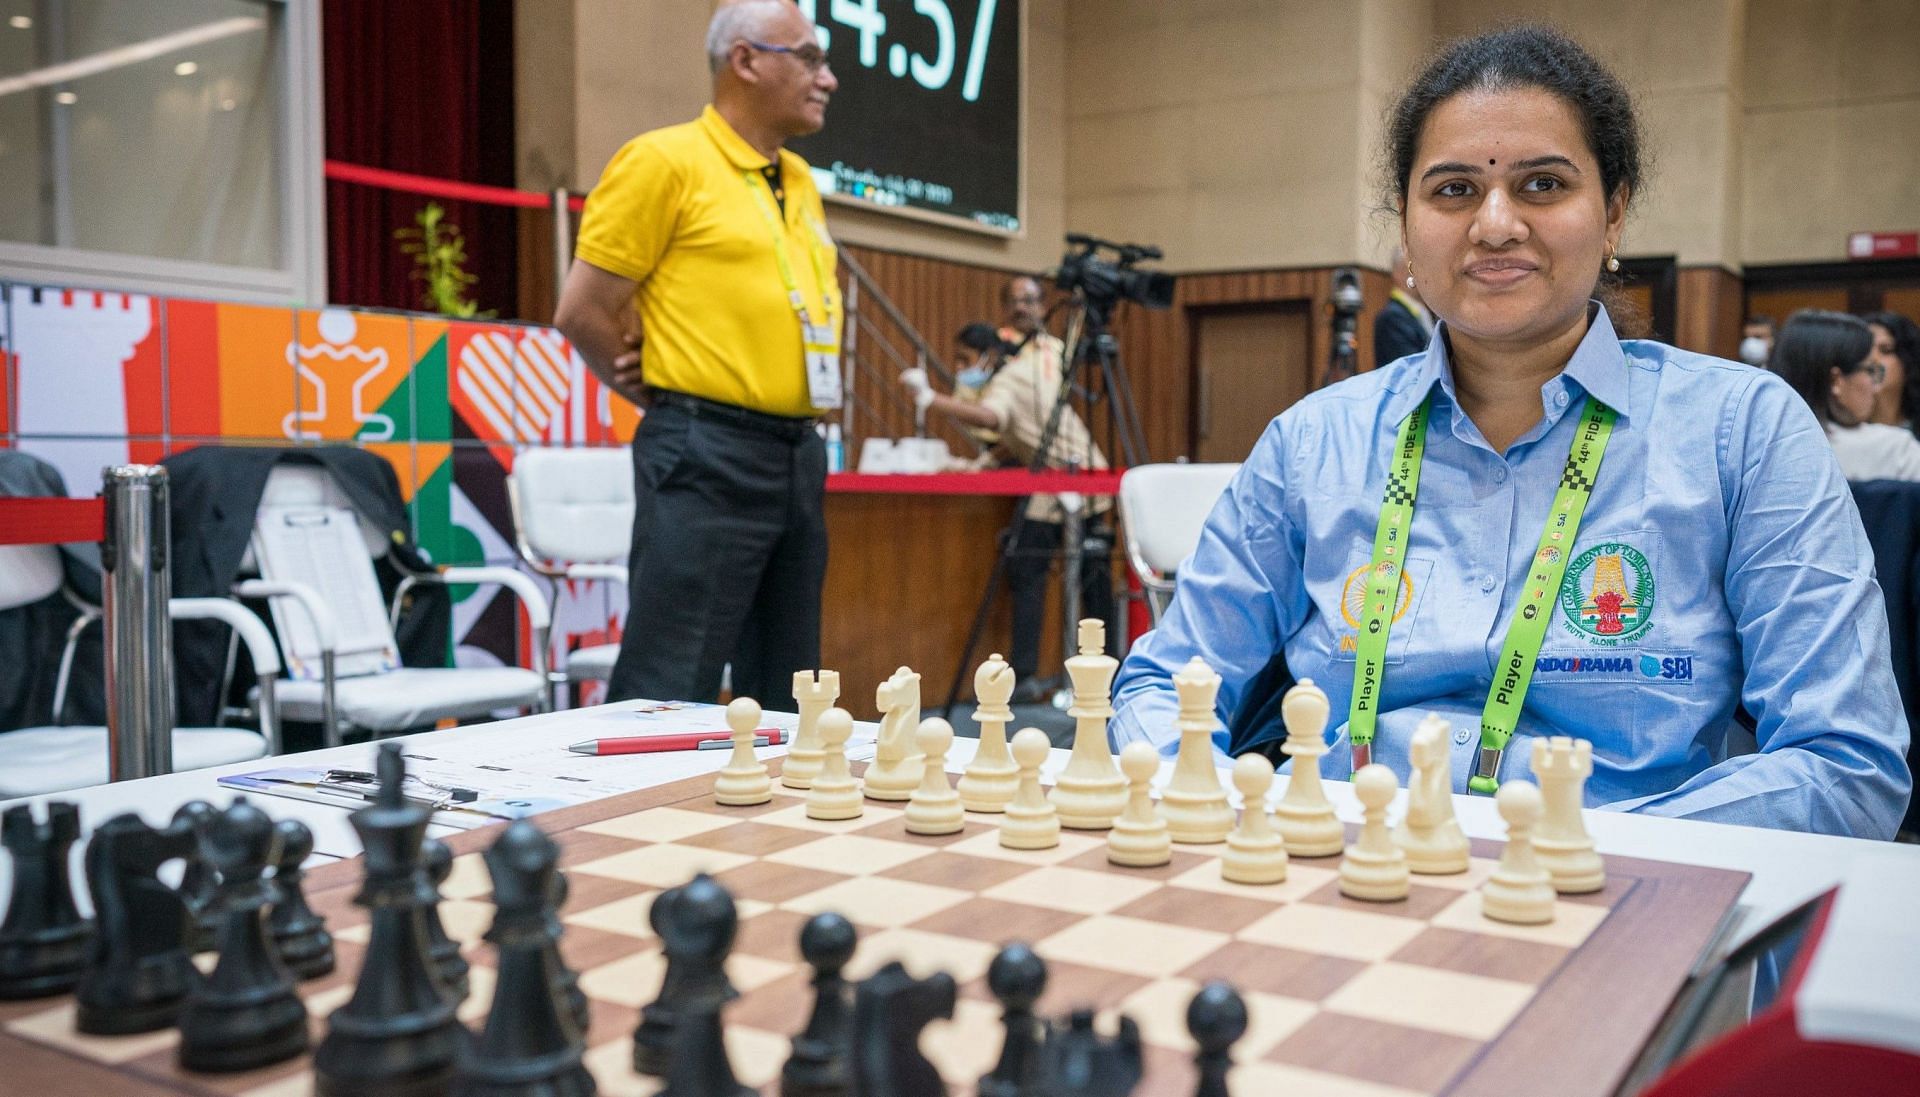 Koneru Humpy in action during the second day of the Chess Olympiad in Chennai on Saturday. (Pic credit: FIDE/Lennart Ootes &amp; Stev Bonhage)